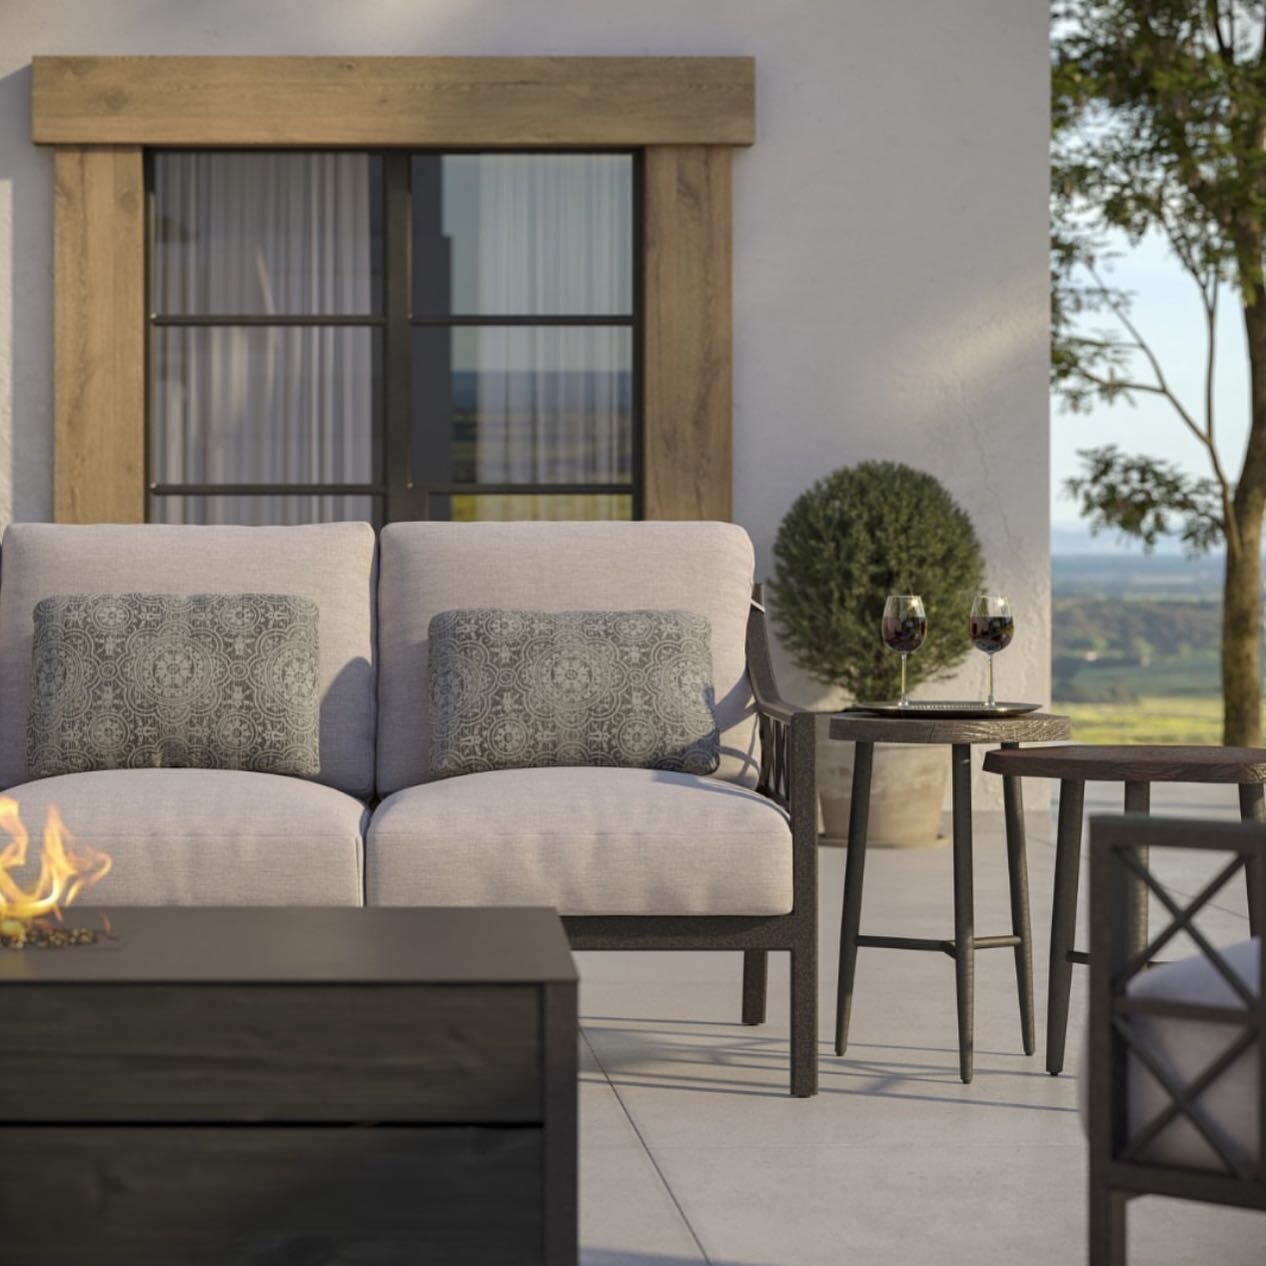 We can't get enough of the Saxton Deep Cushion Lounge Sofa. Exuding modern decadence, the @castelleluxury Xaria sofa is the ultimate outdoor lounging spot. 

Whitney Evans, Ltd. 
Located at the @denverdesigndistrict
595 S. Broadway, Suite 109w
Denver